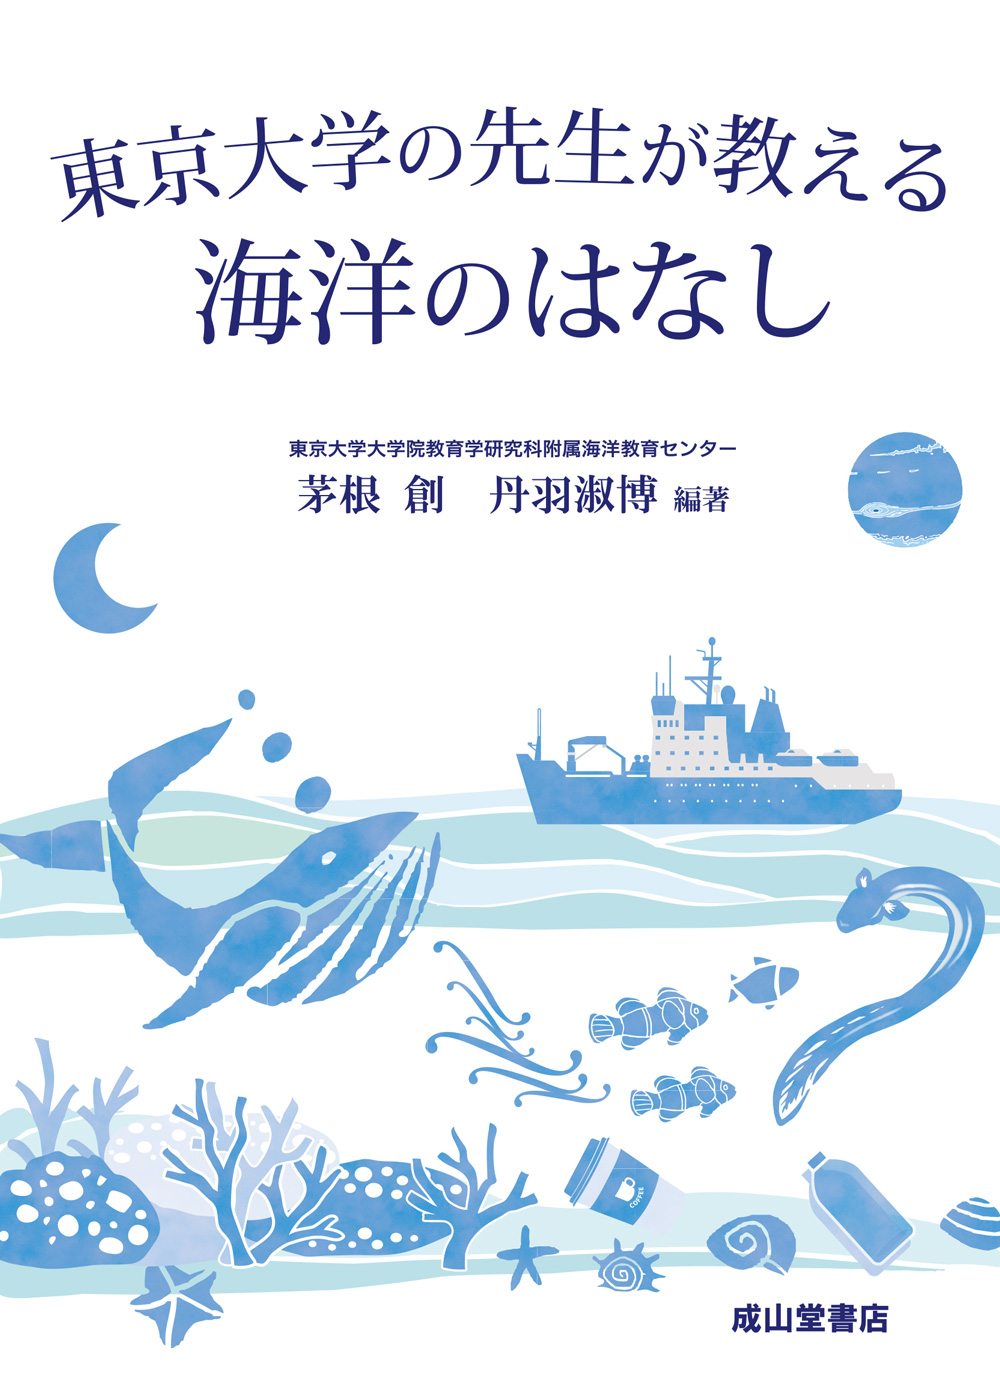 Science Bookshelf No. 60 A professor of the UTokyo teaches about the oceans